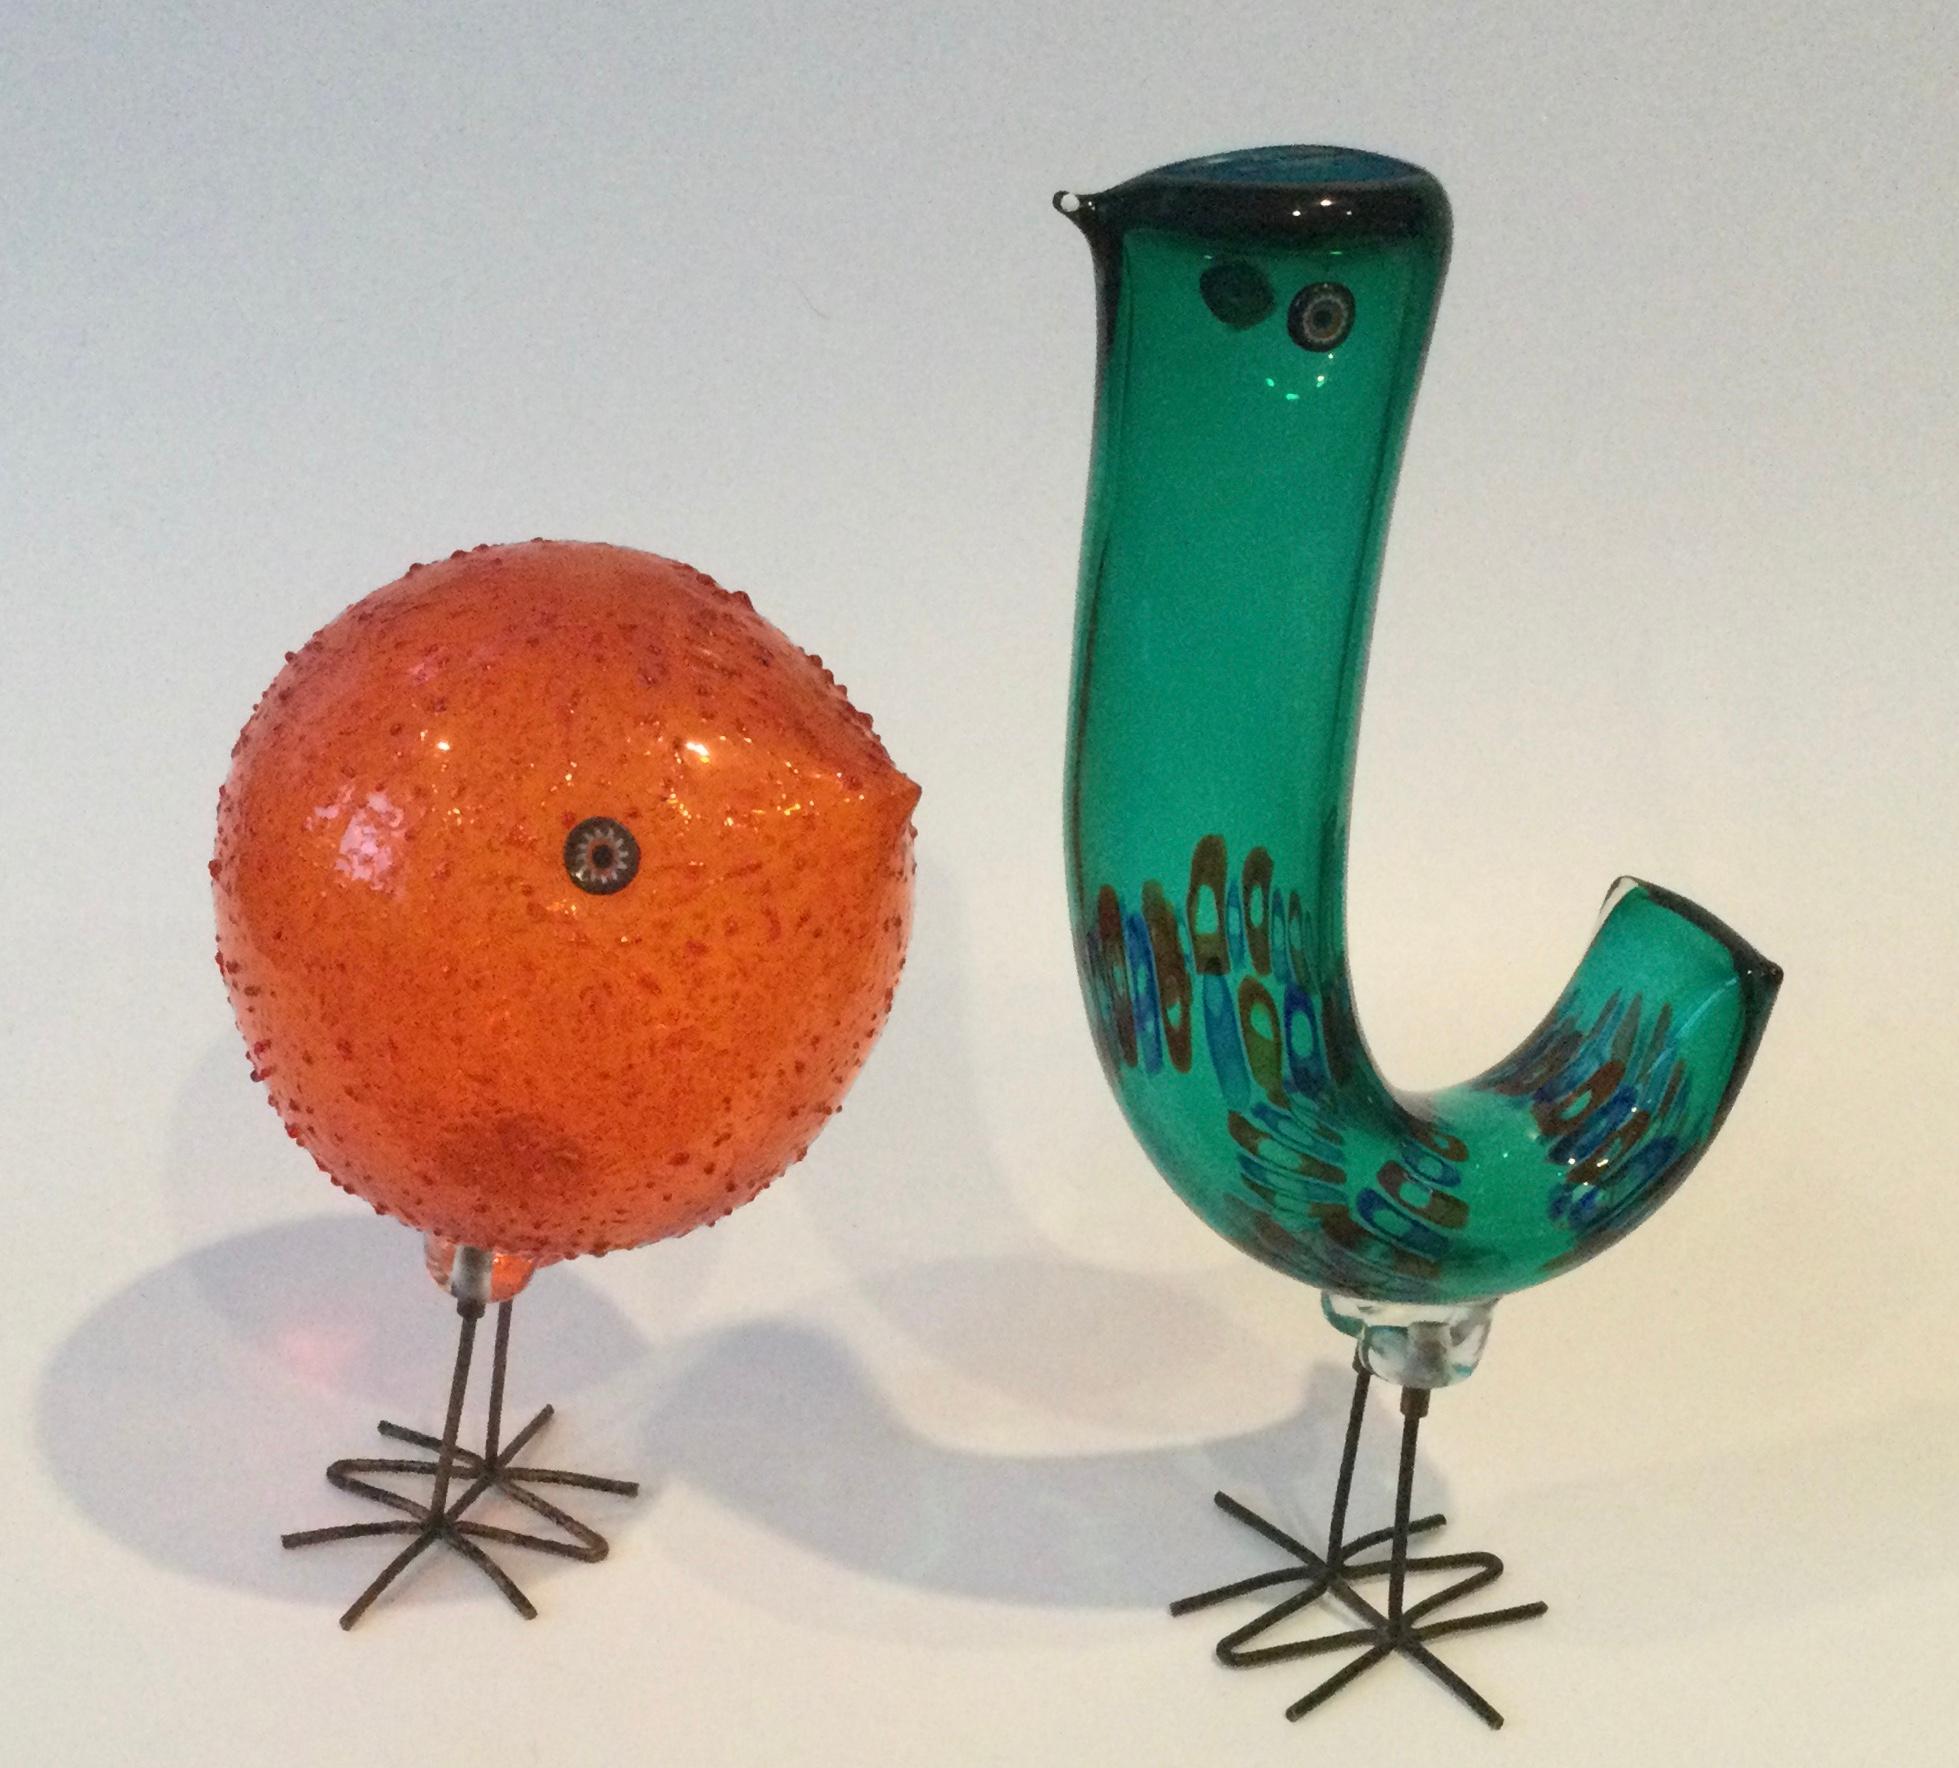 Entire set of highly sought after Murano Birds designed by Alessandro Pianon for Vistosi Circa 1960’s. Finding one of these iconic birds is rare these days, but finding an entire set is almost impossible. These birds have been in very high demand as